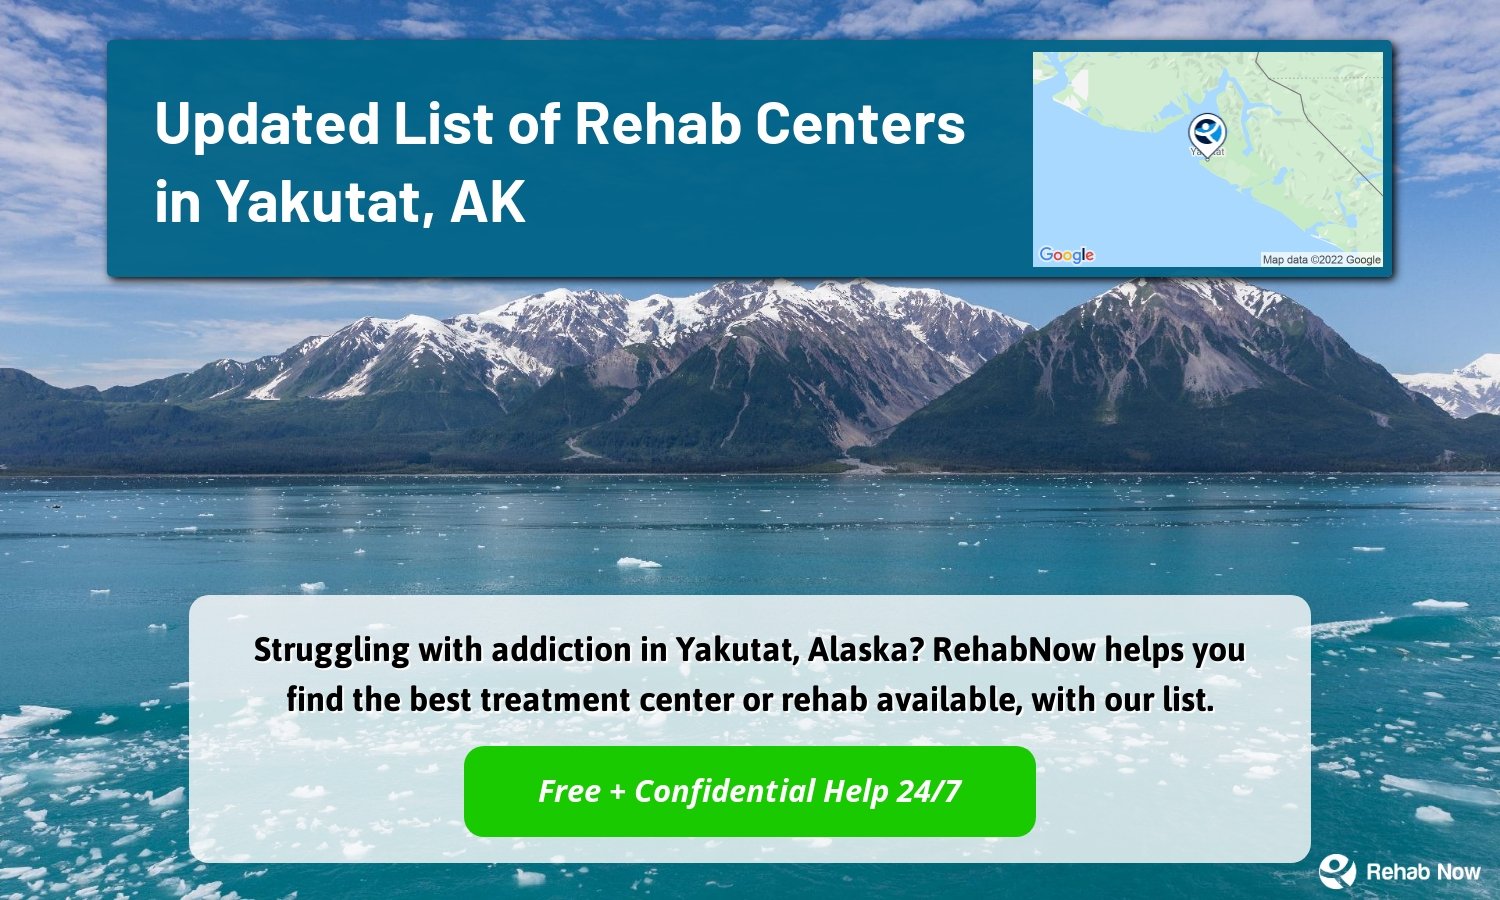 Struggling with addiction in Yakutat, Alaska? RehabNow helps you find the best treatment center or rehab available, with our list.